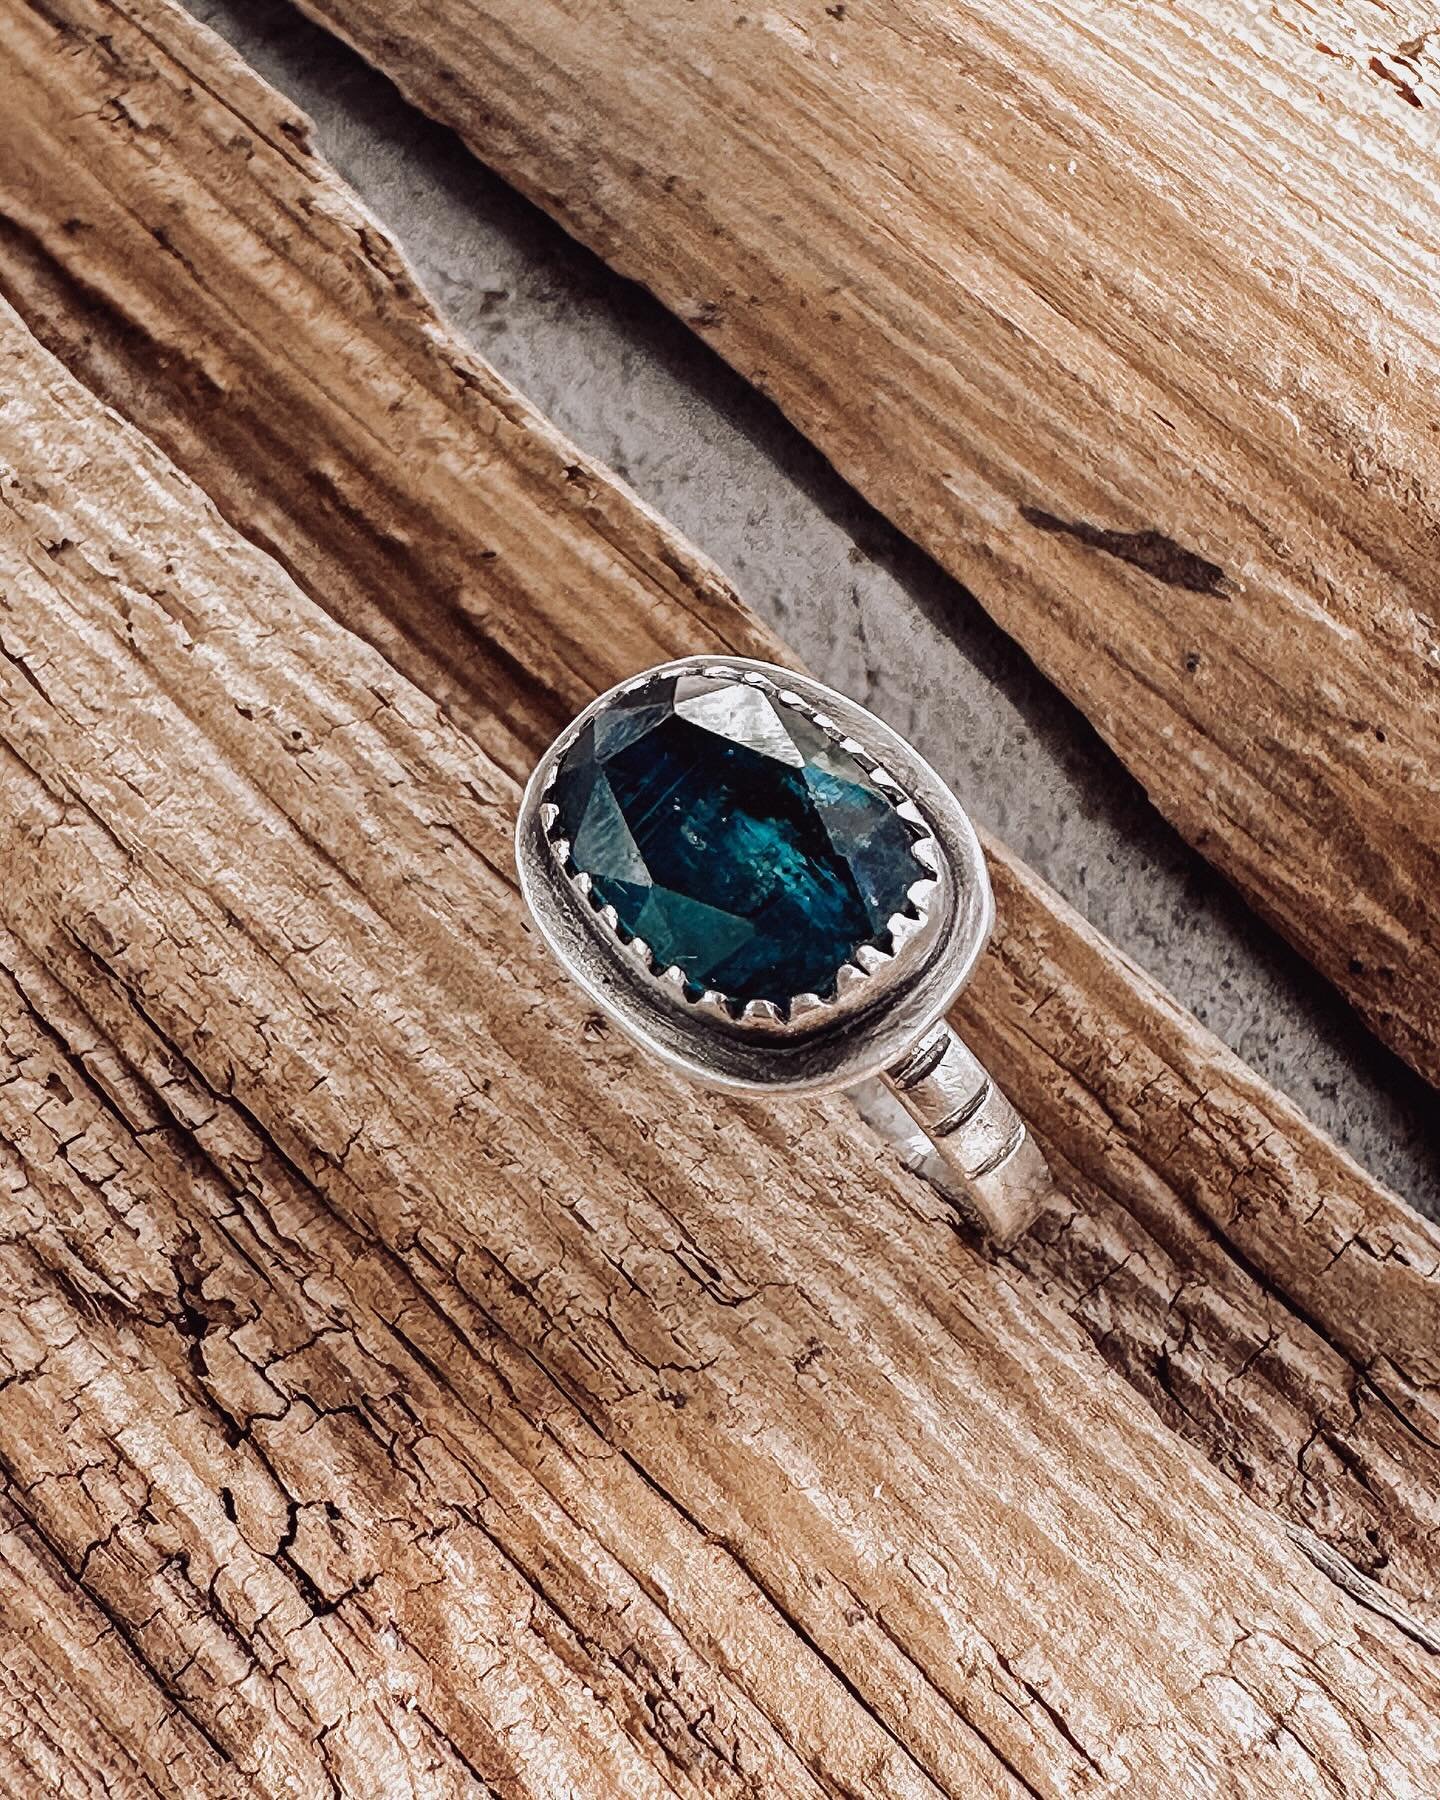 I&rsquo;ve been hoarding these gorgeous teal kyanites until I found the perfect setting. Loving the way it catches the light in this ring and the stone goes from dark to light ✨ 
.
.
.
#tealkyanitejewellery #kyanitejewelry #daintyjewelry #silversmith